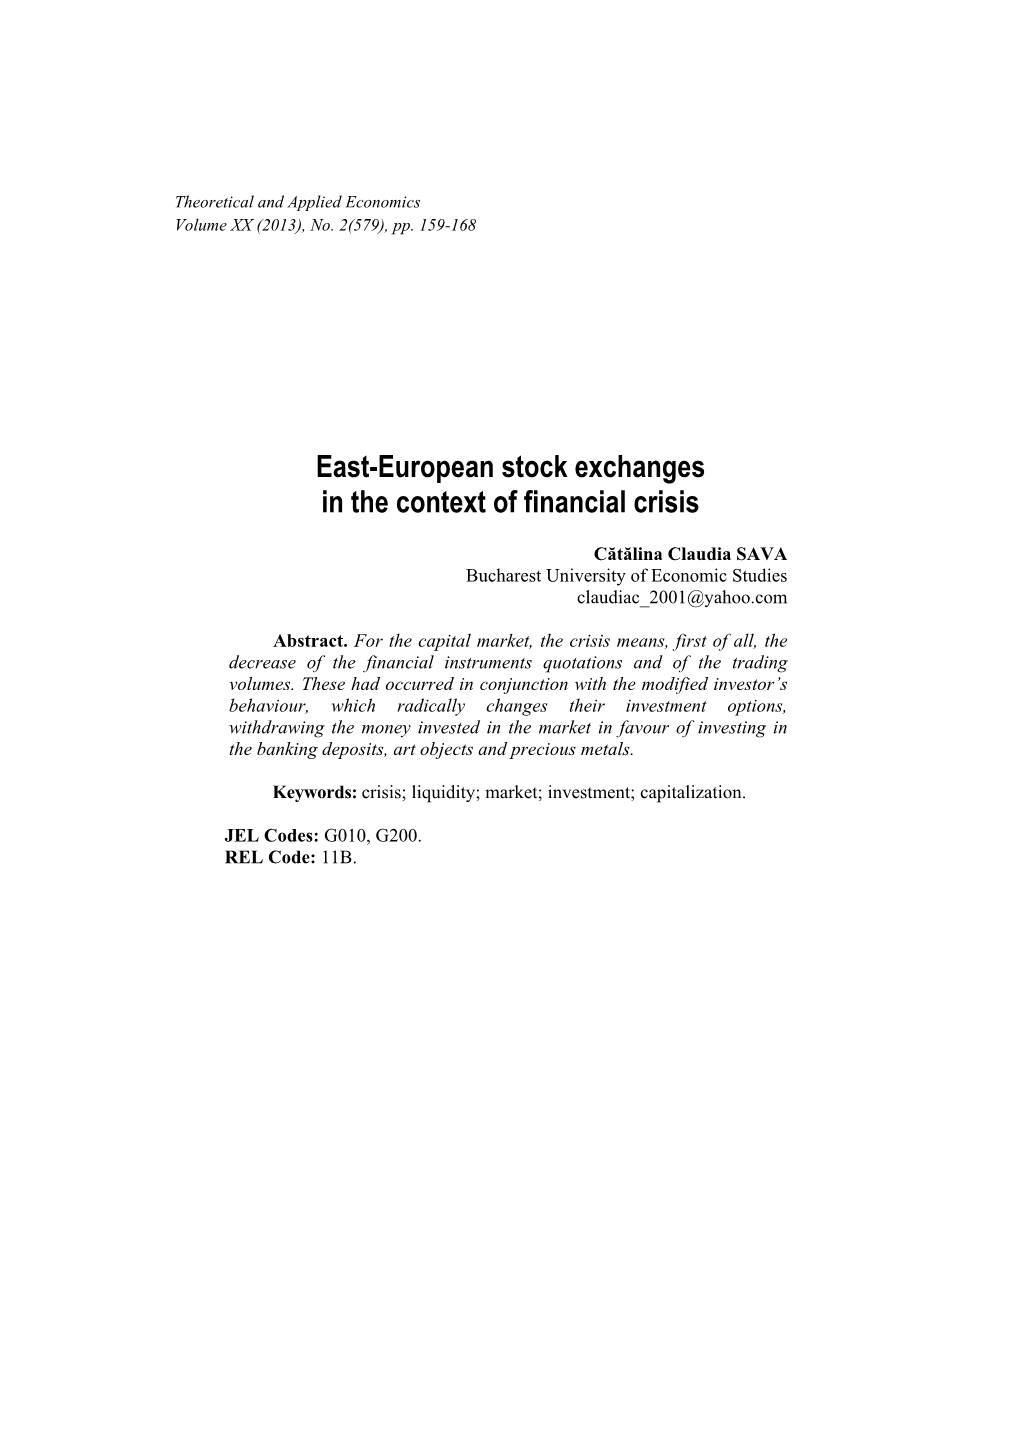 East-European Stock Exchanges in the Context of Financial Crisis